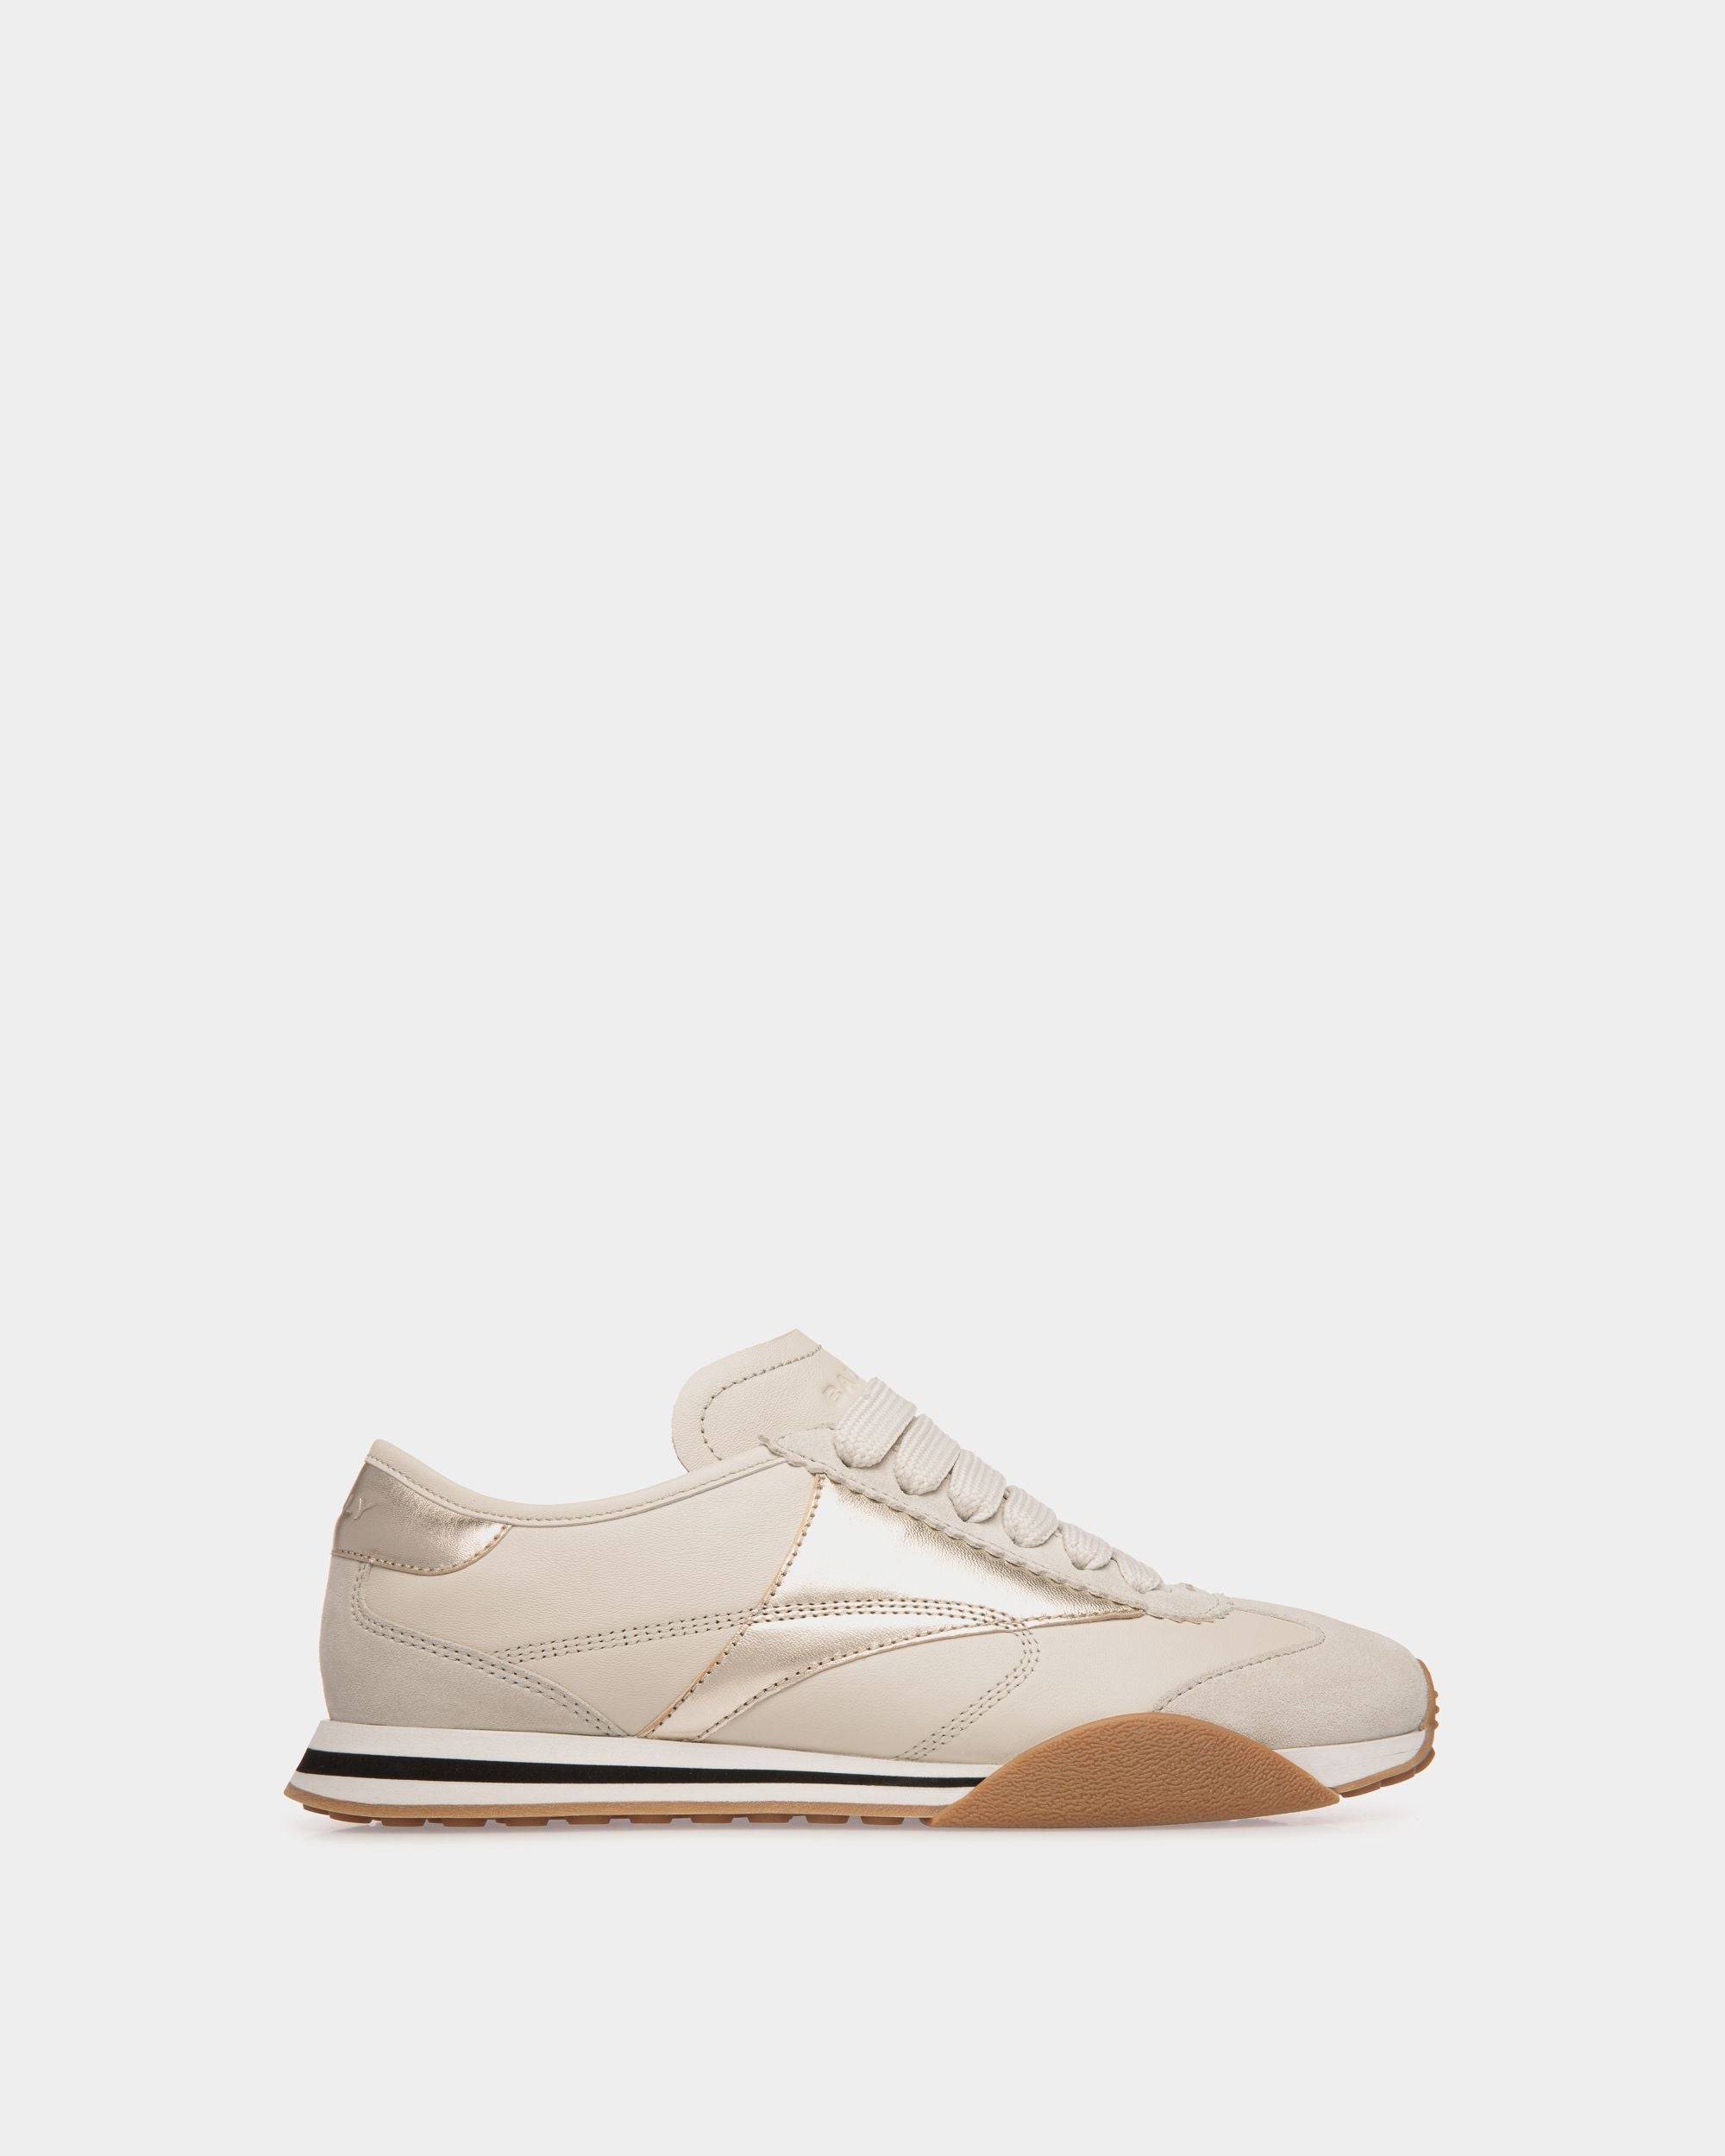 Sussex Sneaker In White And Gold Leather - Women's - Bally - 01